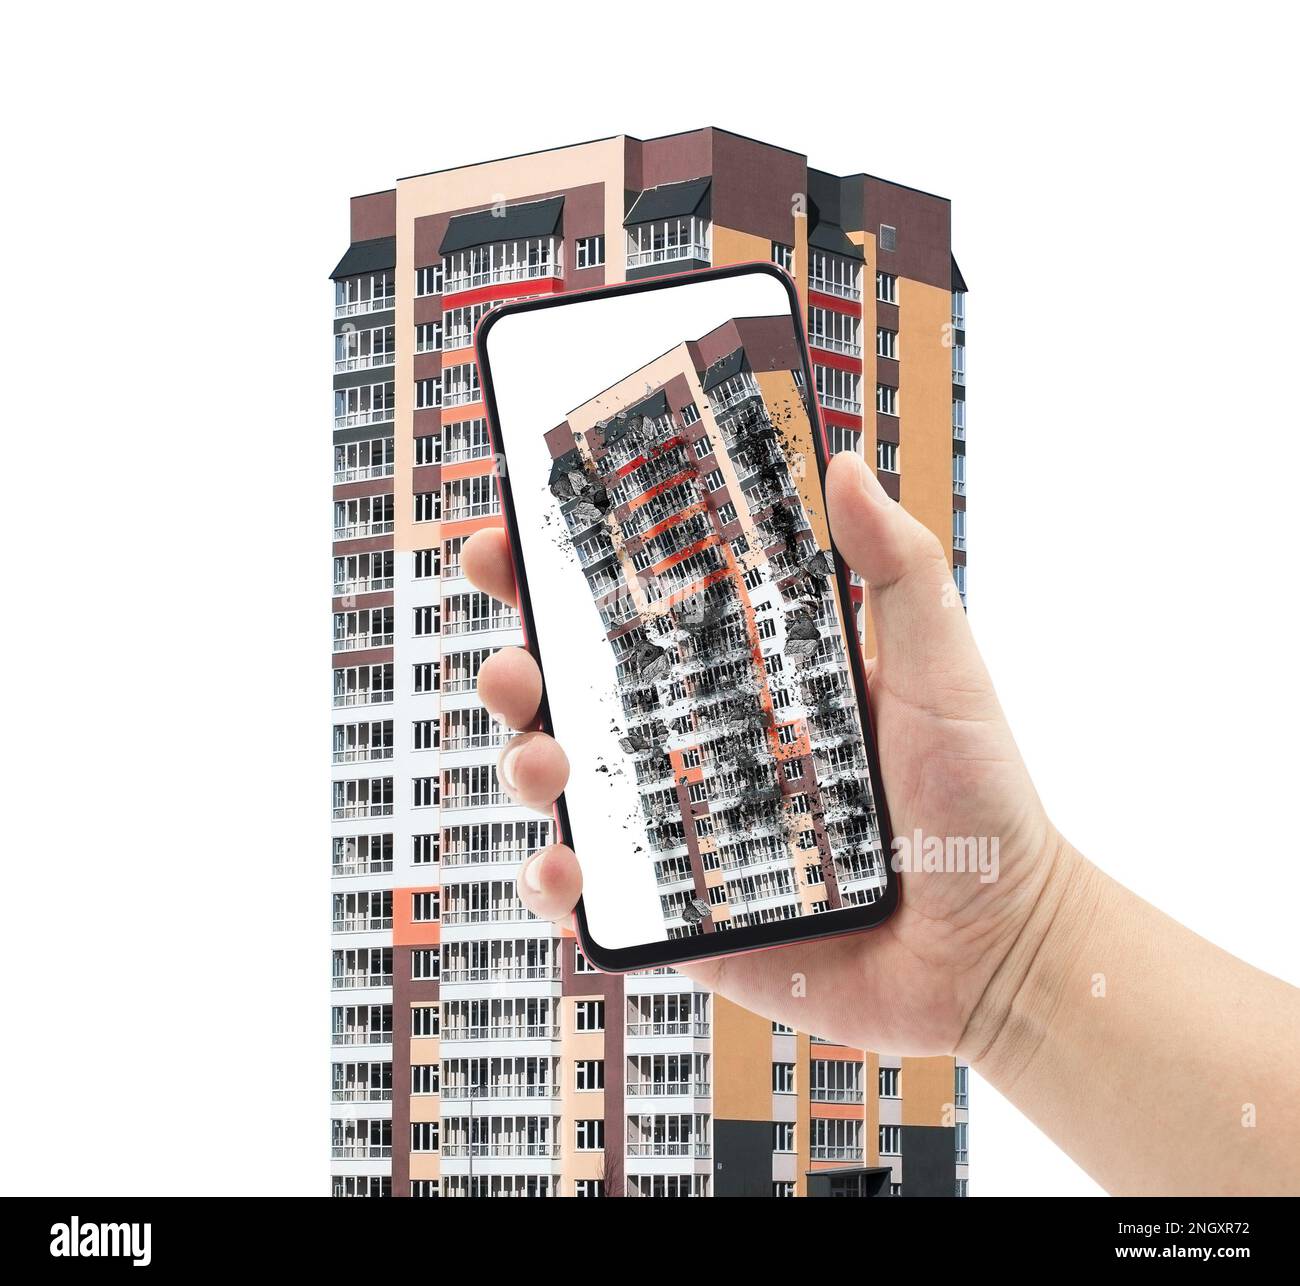 Earthquake. Disinformation. Fake news on social media. Photographing before and after the earthquake. Destroyed building. Hand holding mobile phone. Stock Photo